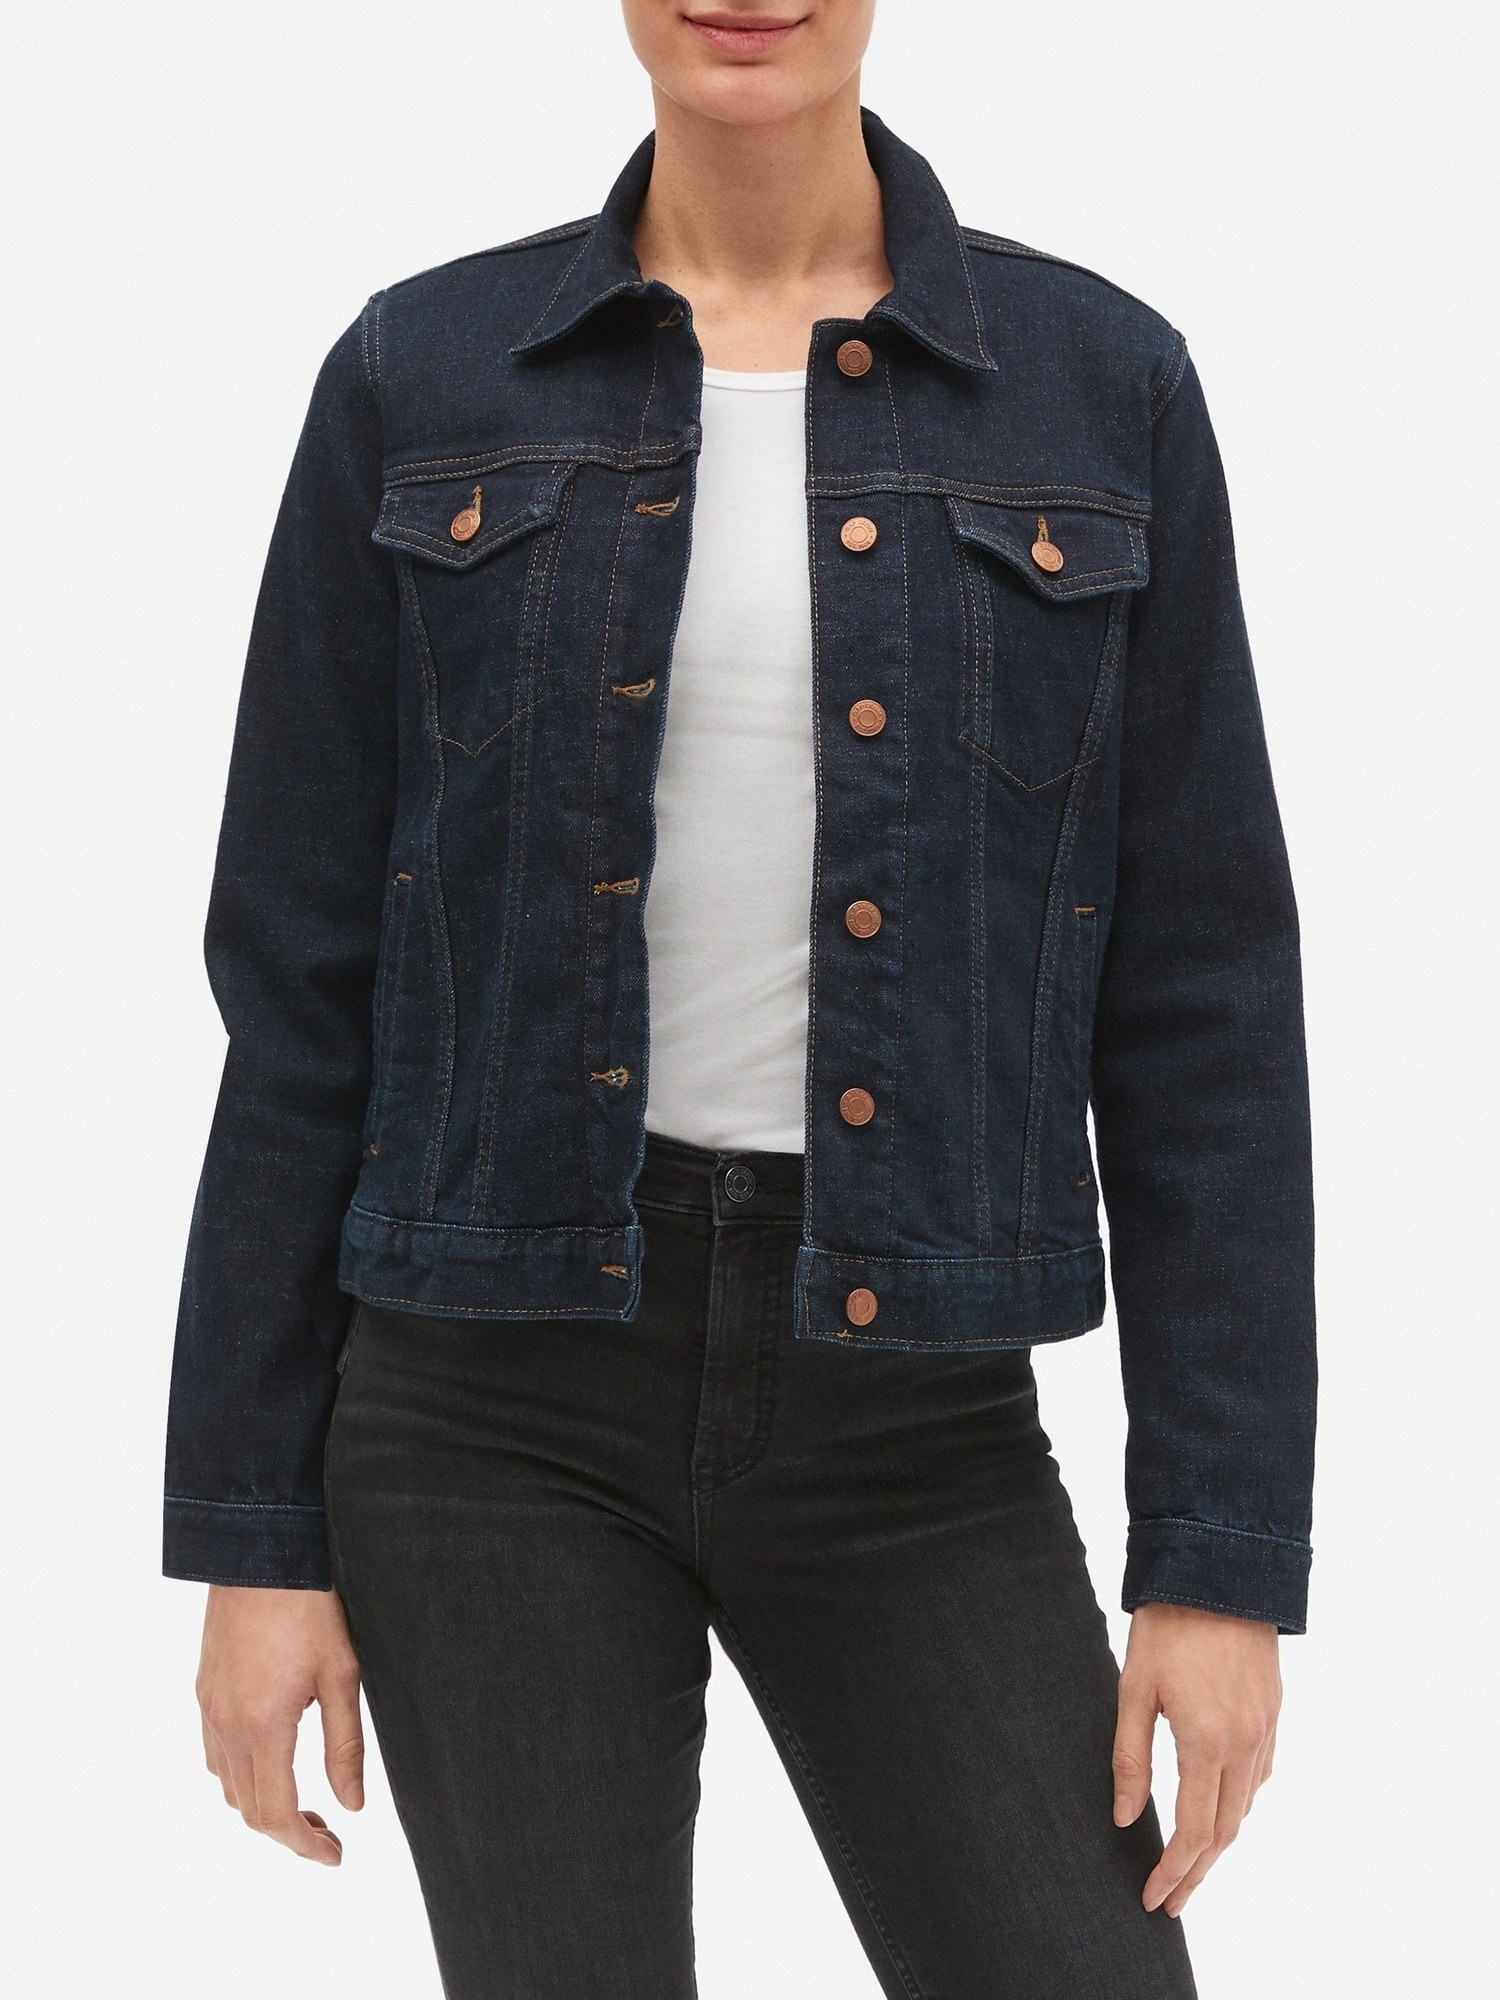 Gap Factory's Site-Wide Sale Is Up To 75% Off — Plus An Extra 20% Off ...